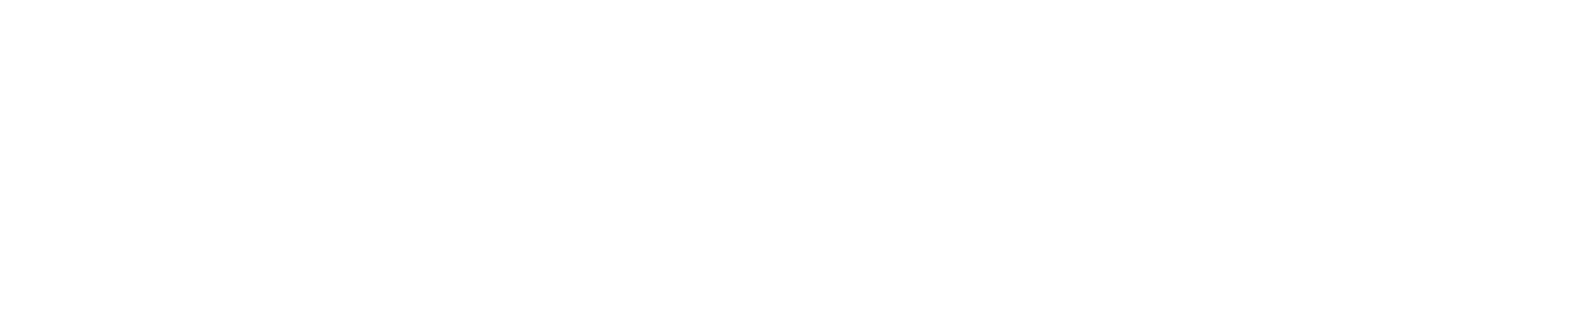 Boojum Expeditions